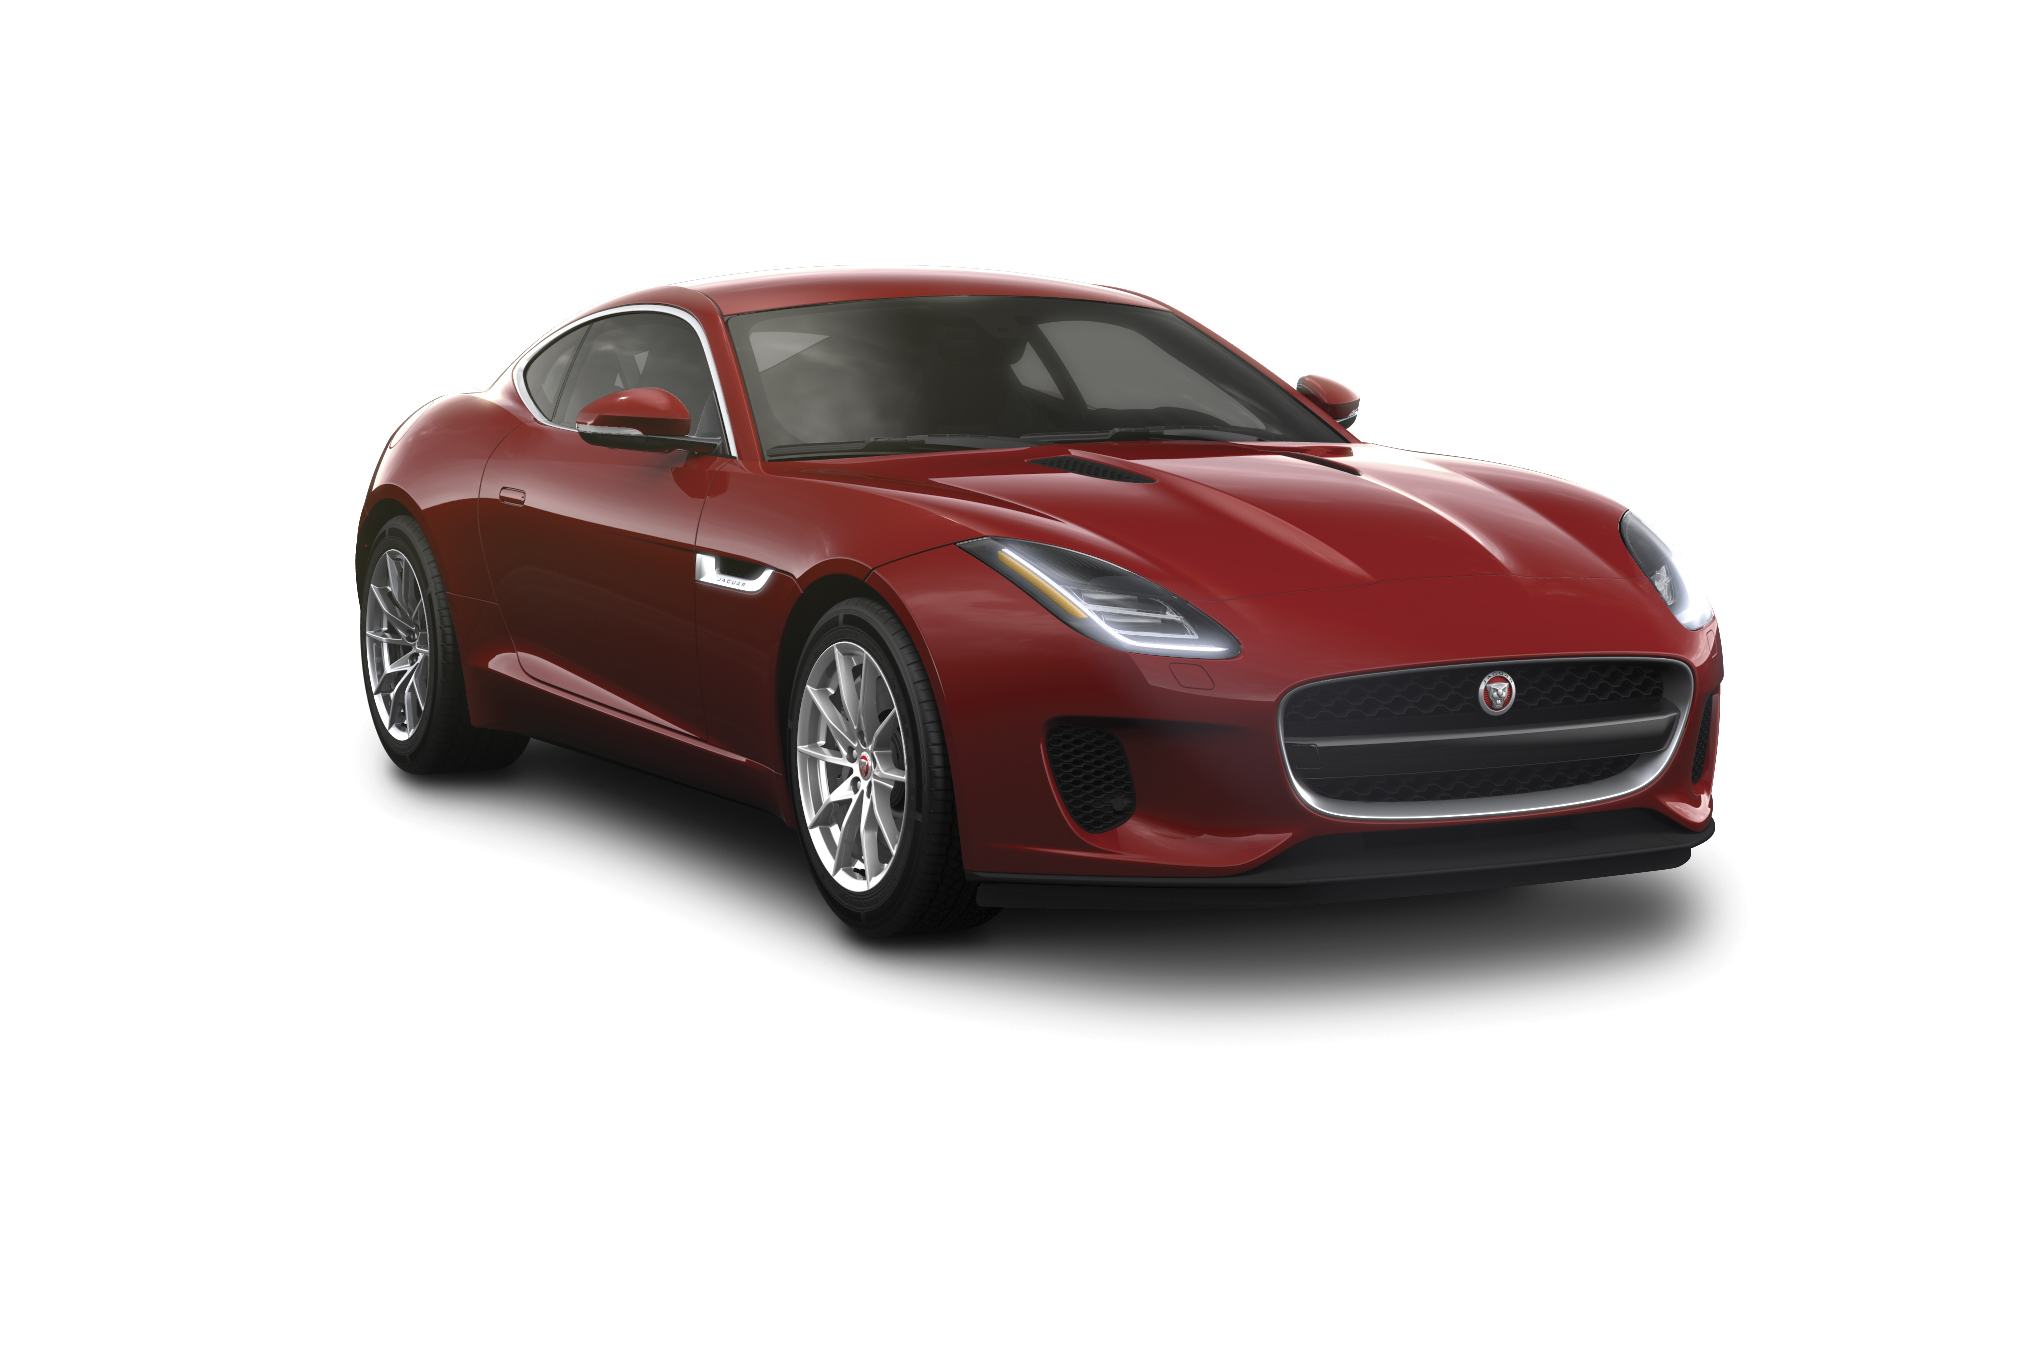 The 2020 Jaguar F Type is a sports car with many features and power, which sets it apart from the rest. It boasts great performance, striking looks, and practicality.